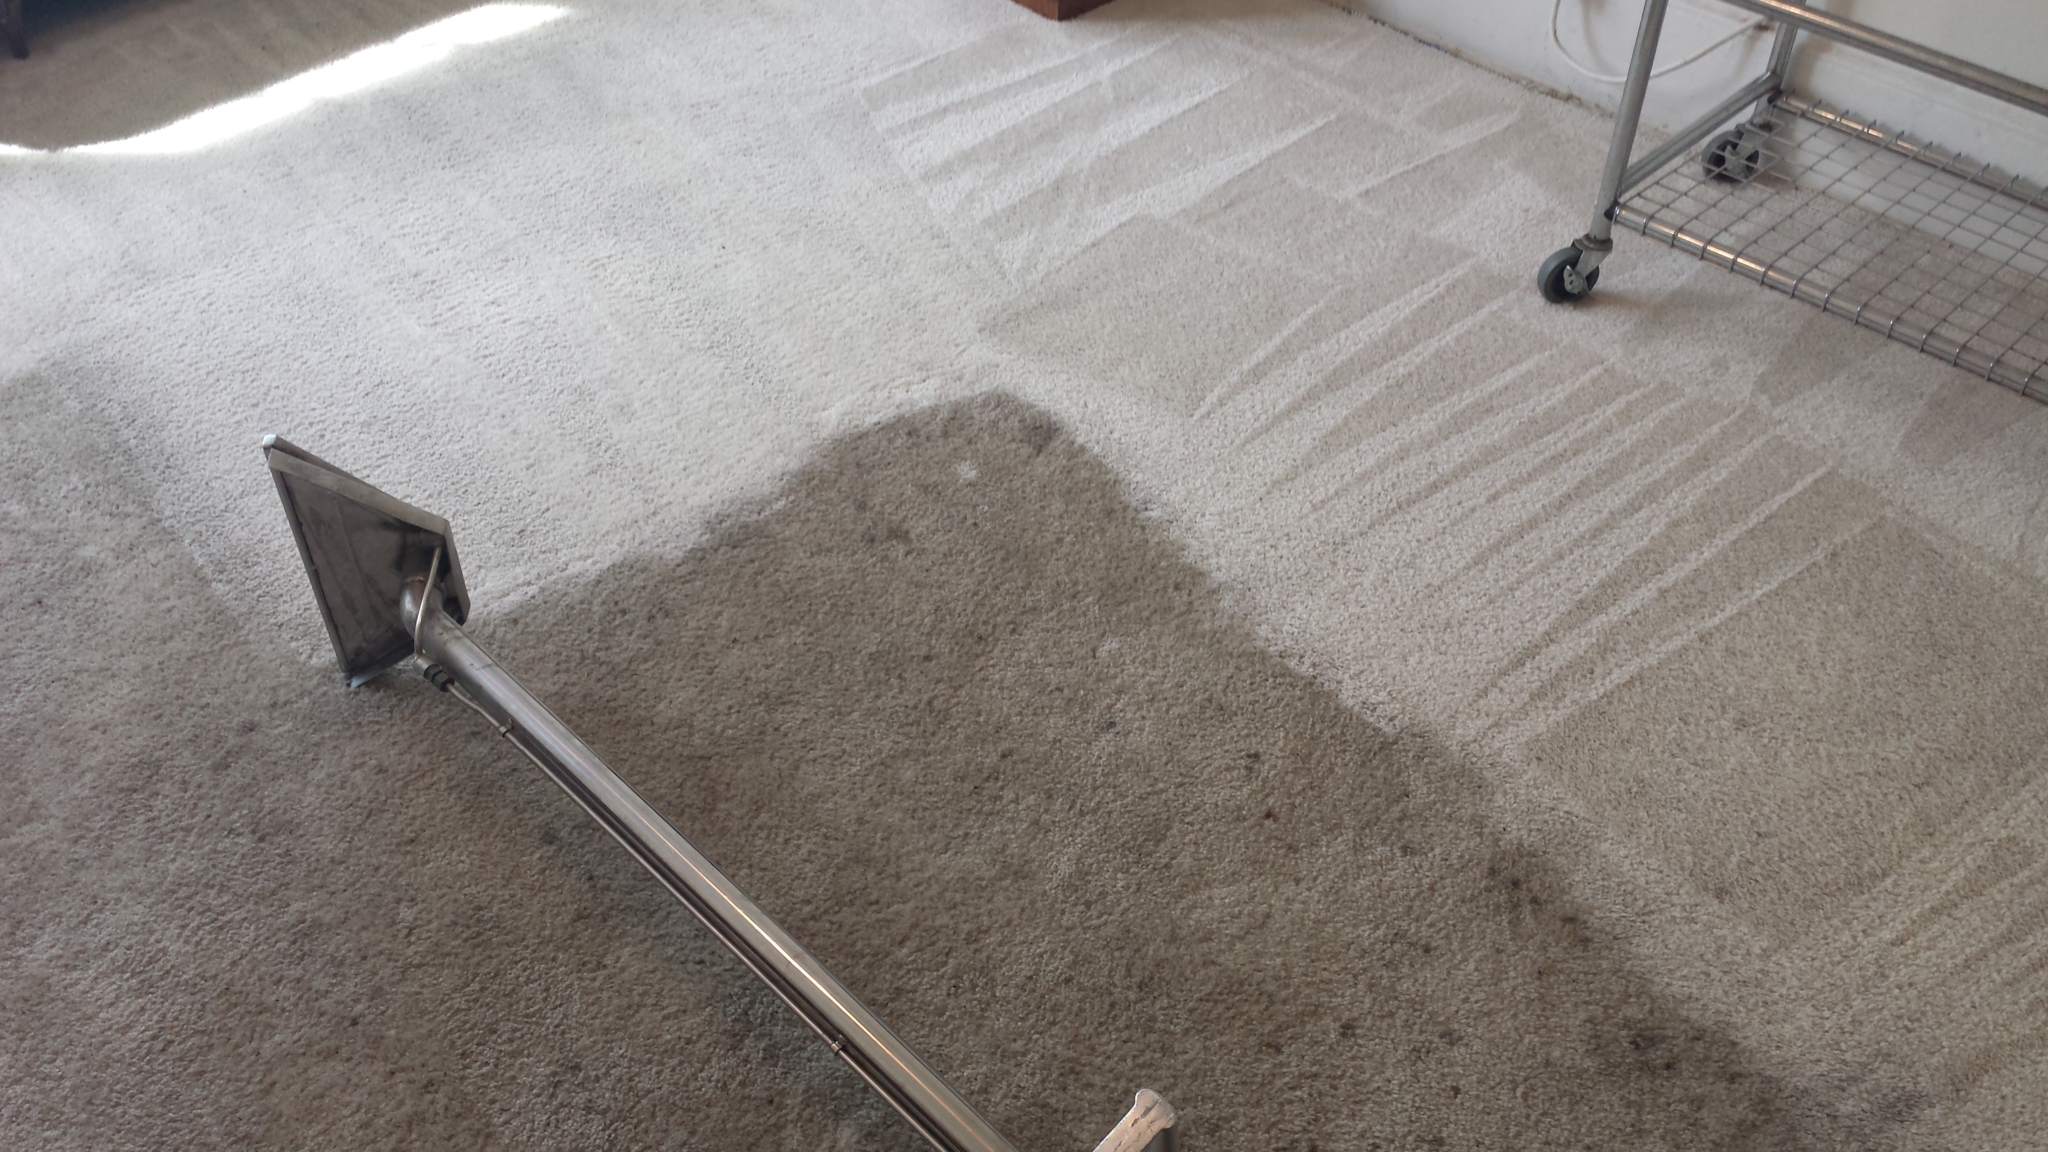 Remarkable carpet cleaning results